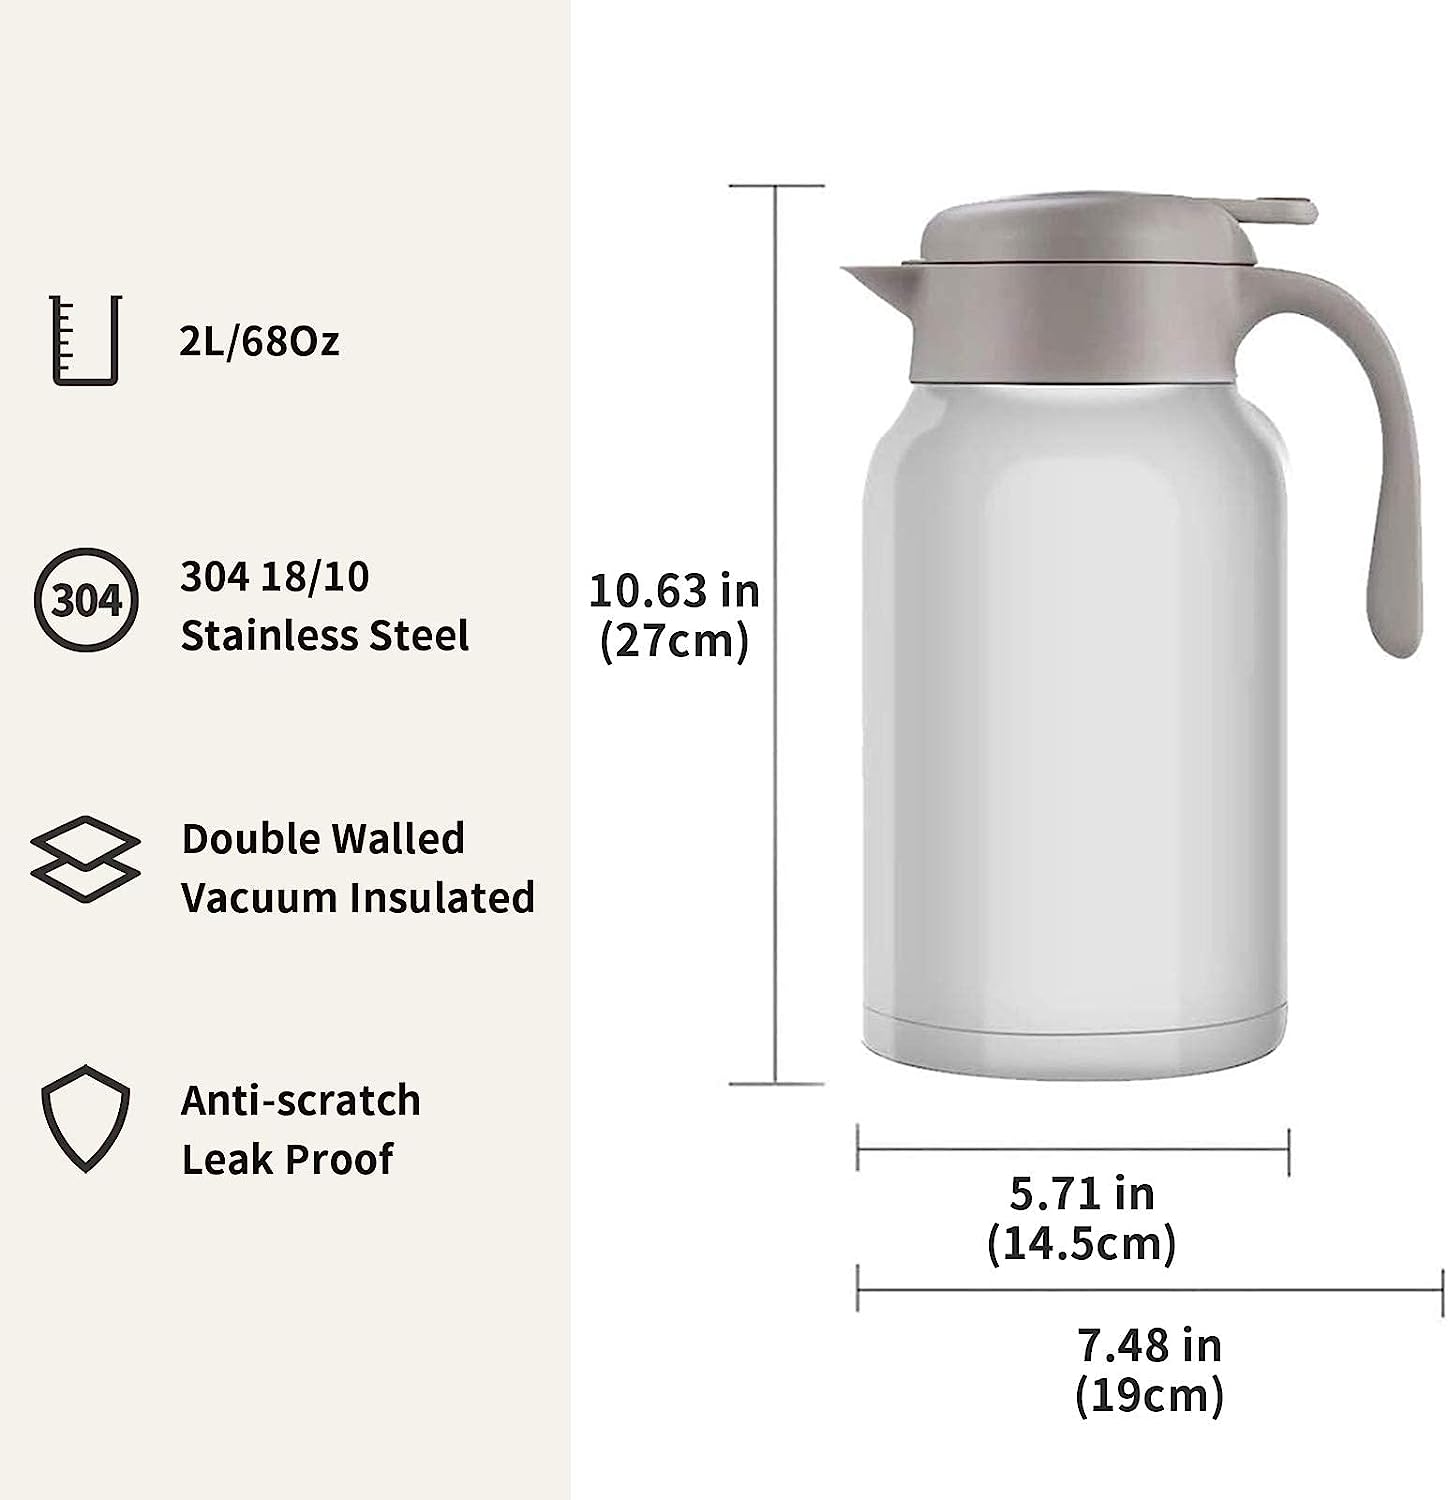 Bonnoces 68 Oz Stainless Steel Thermal Carafe - Double Walled Vacuum  Insualted Thermos/Carafe with Lid - Coffee/Tea Carafe Heat & Cold Retention  - 2